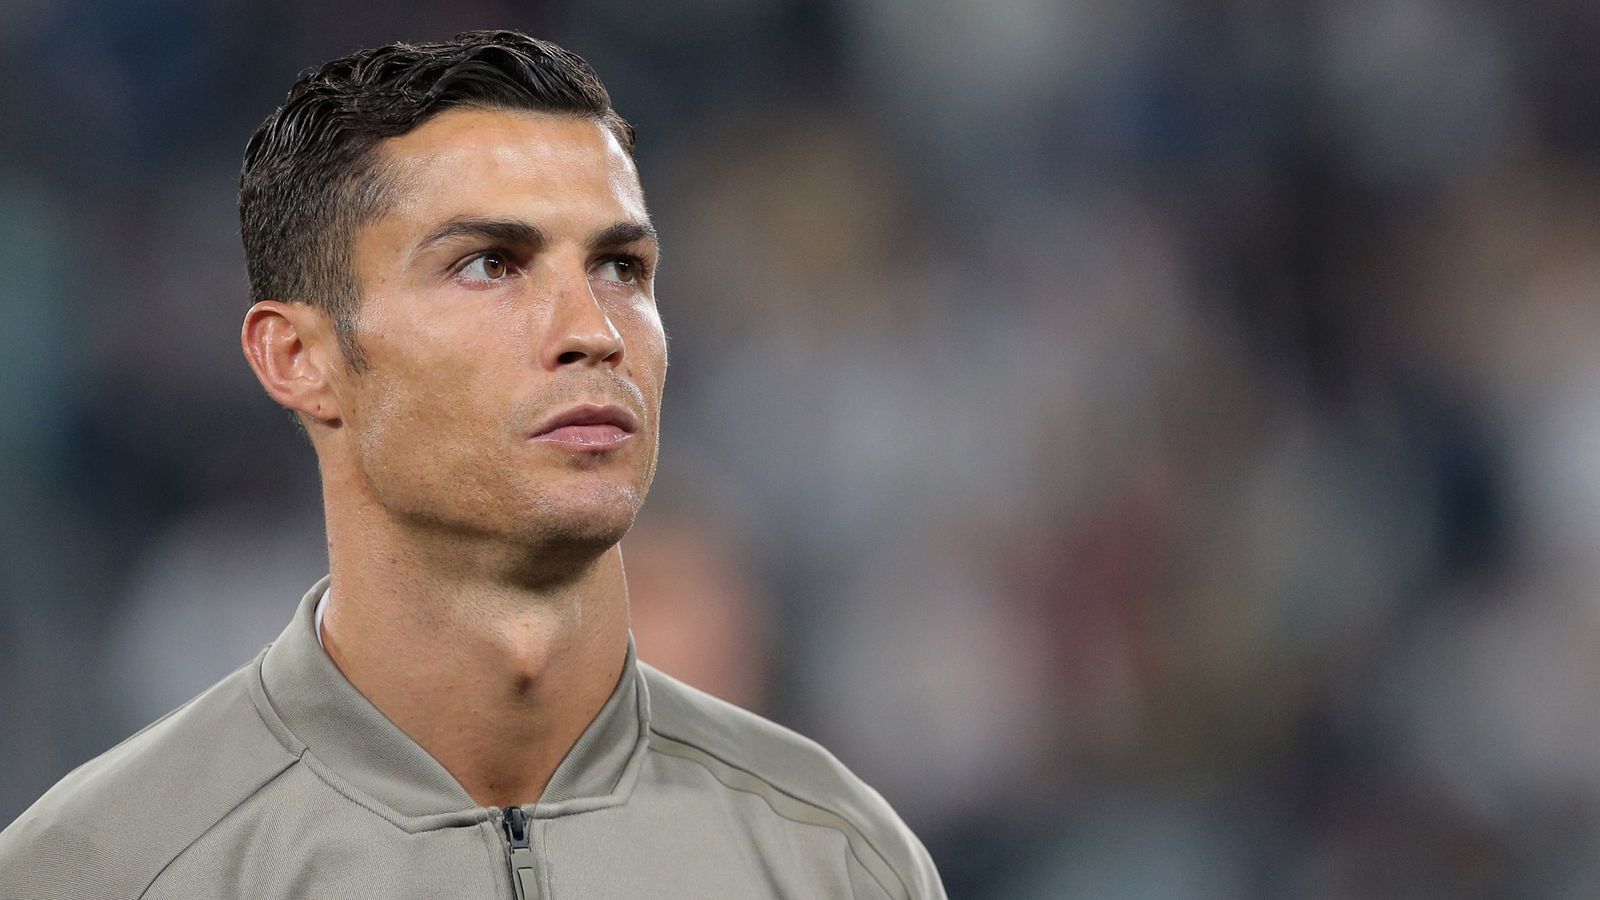 Ronaldo Is the First Billionaire among Football Players of All Time